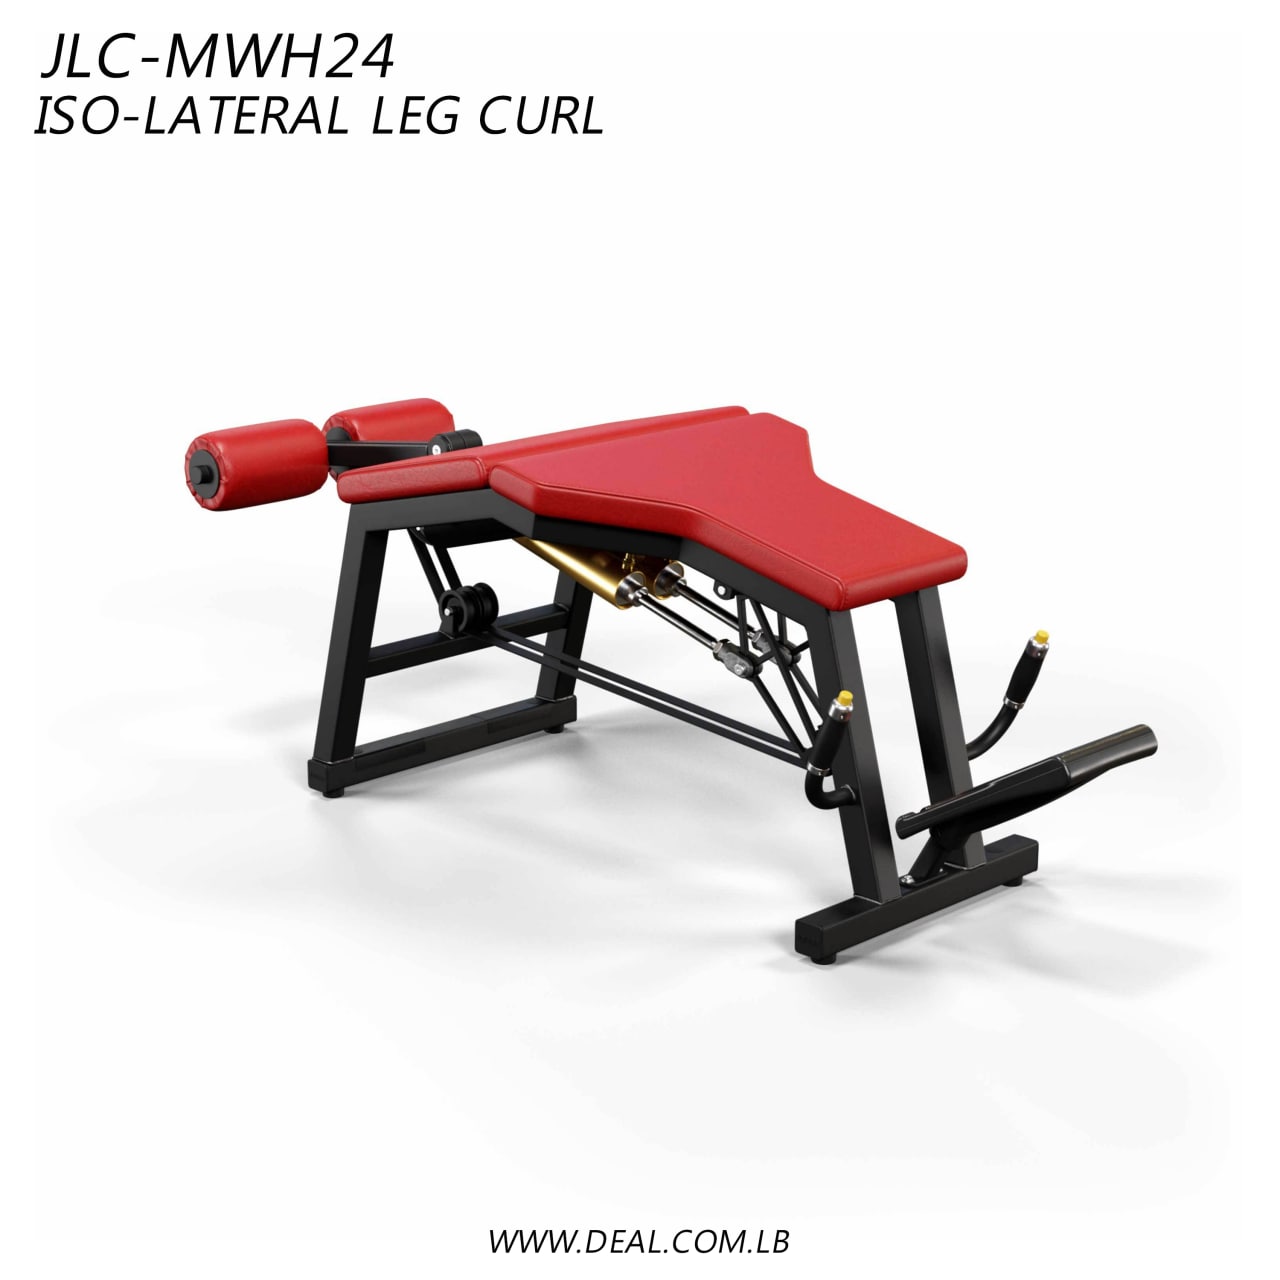 JLC-MWH24 | ISO-Lateral leg curl